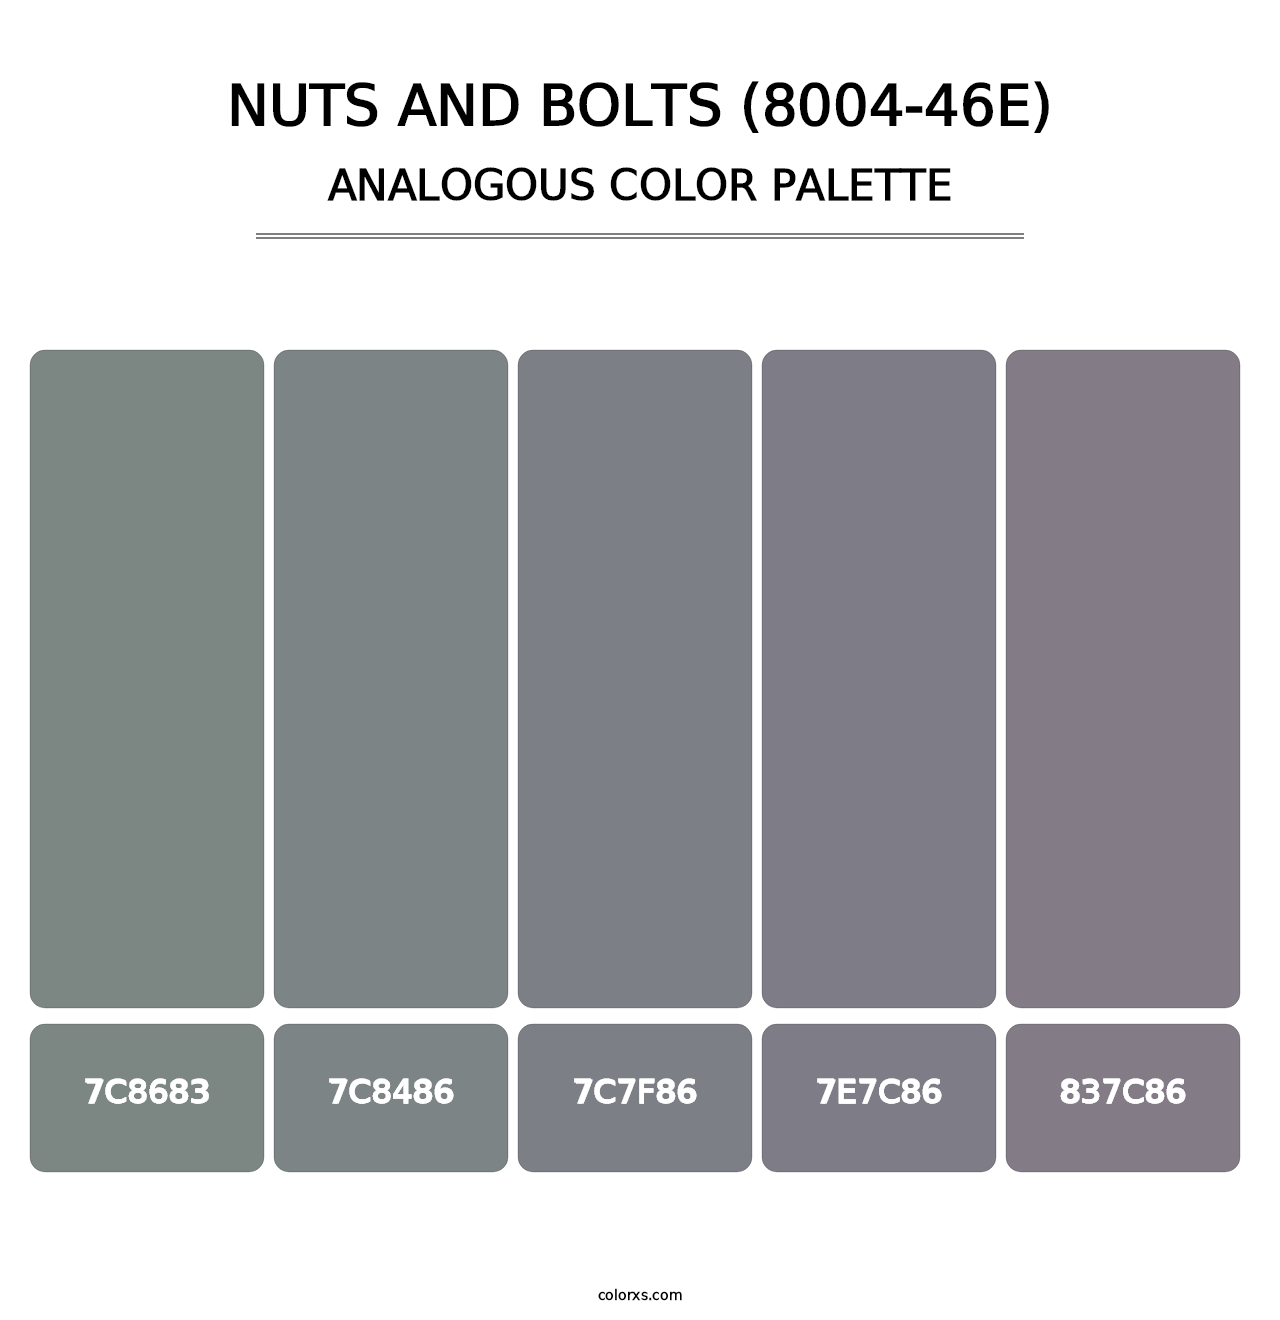 Nuts and Bolts (8004-46E) - Analogous Color Palette